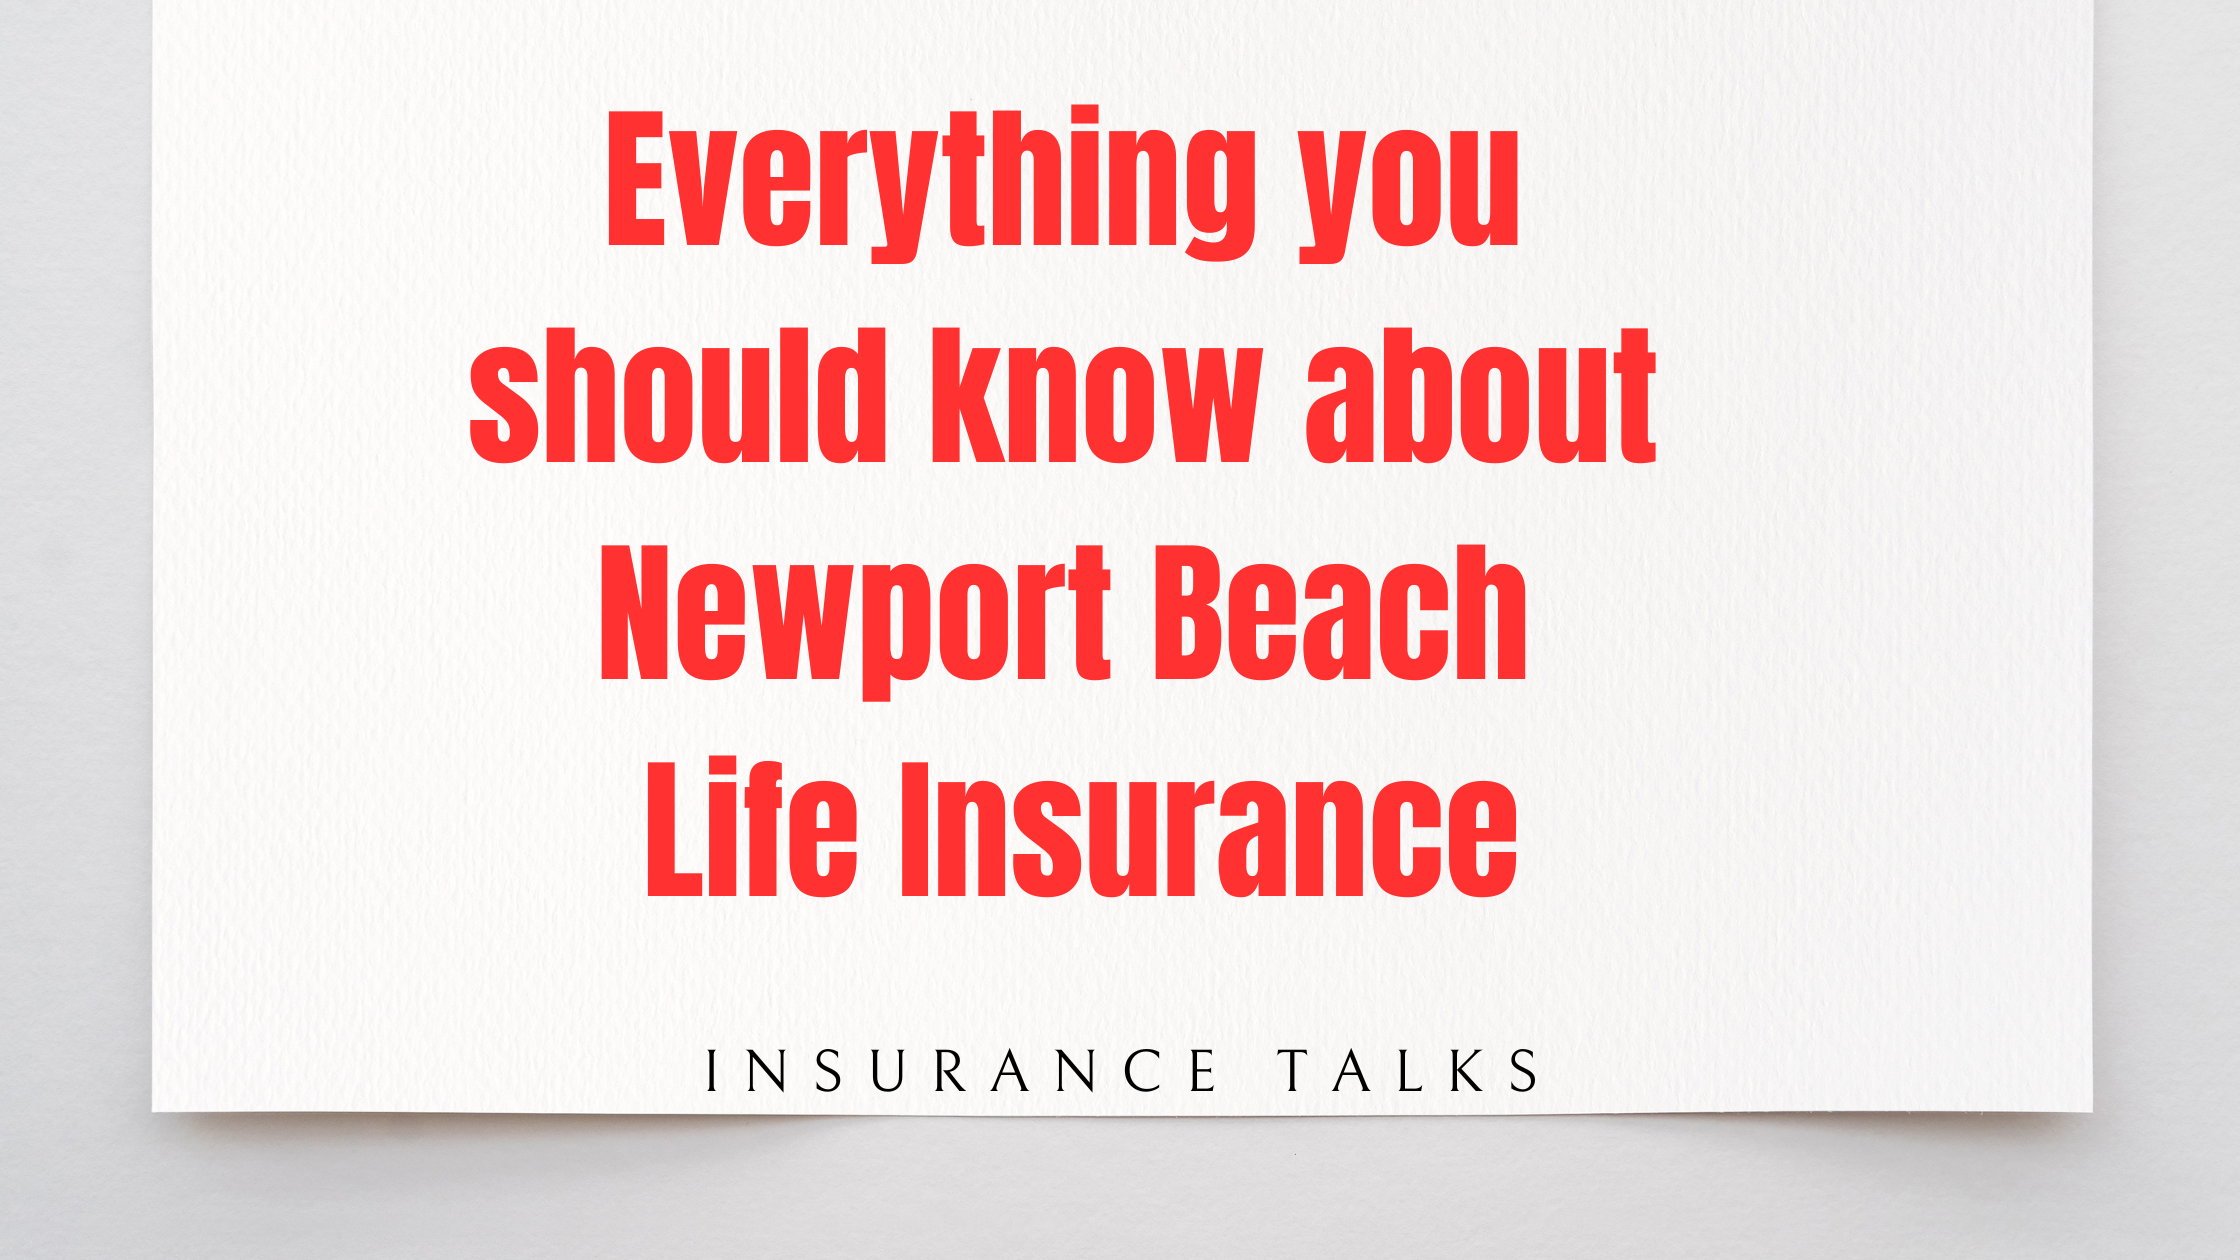 Everything you should know about Newport Beach Life Insurance